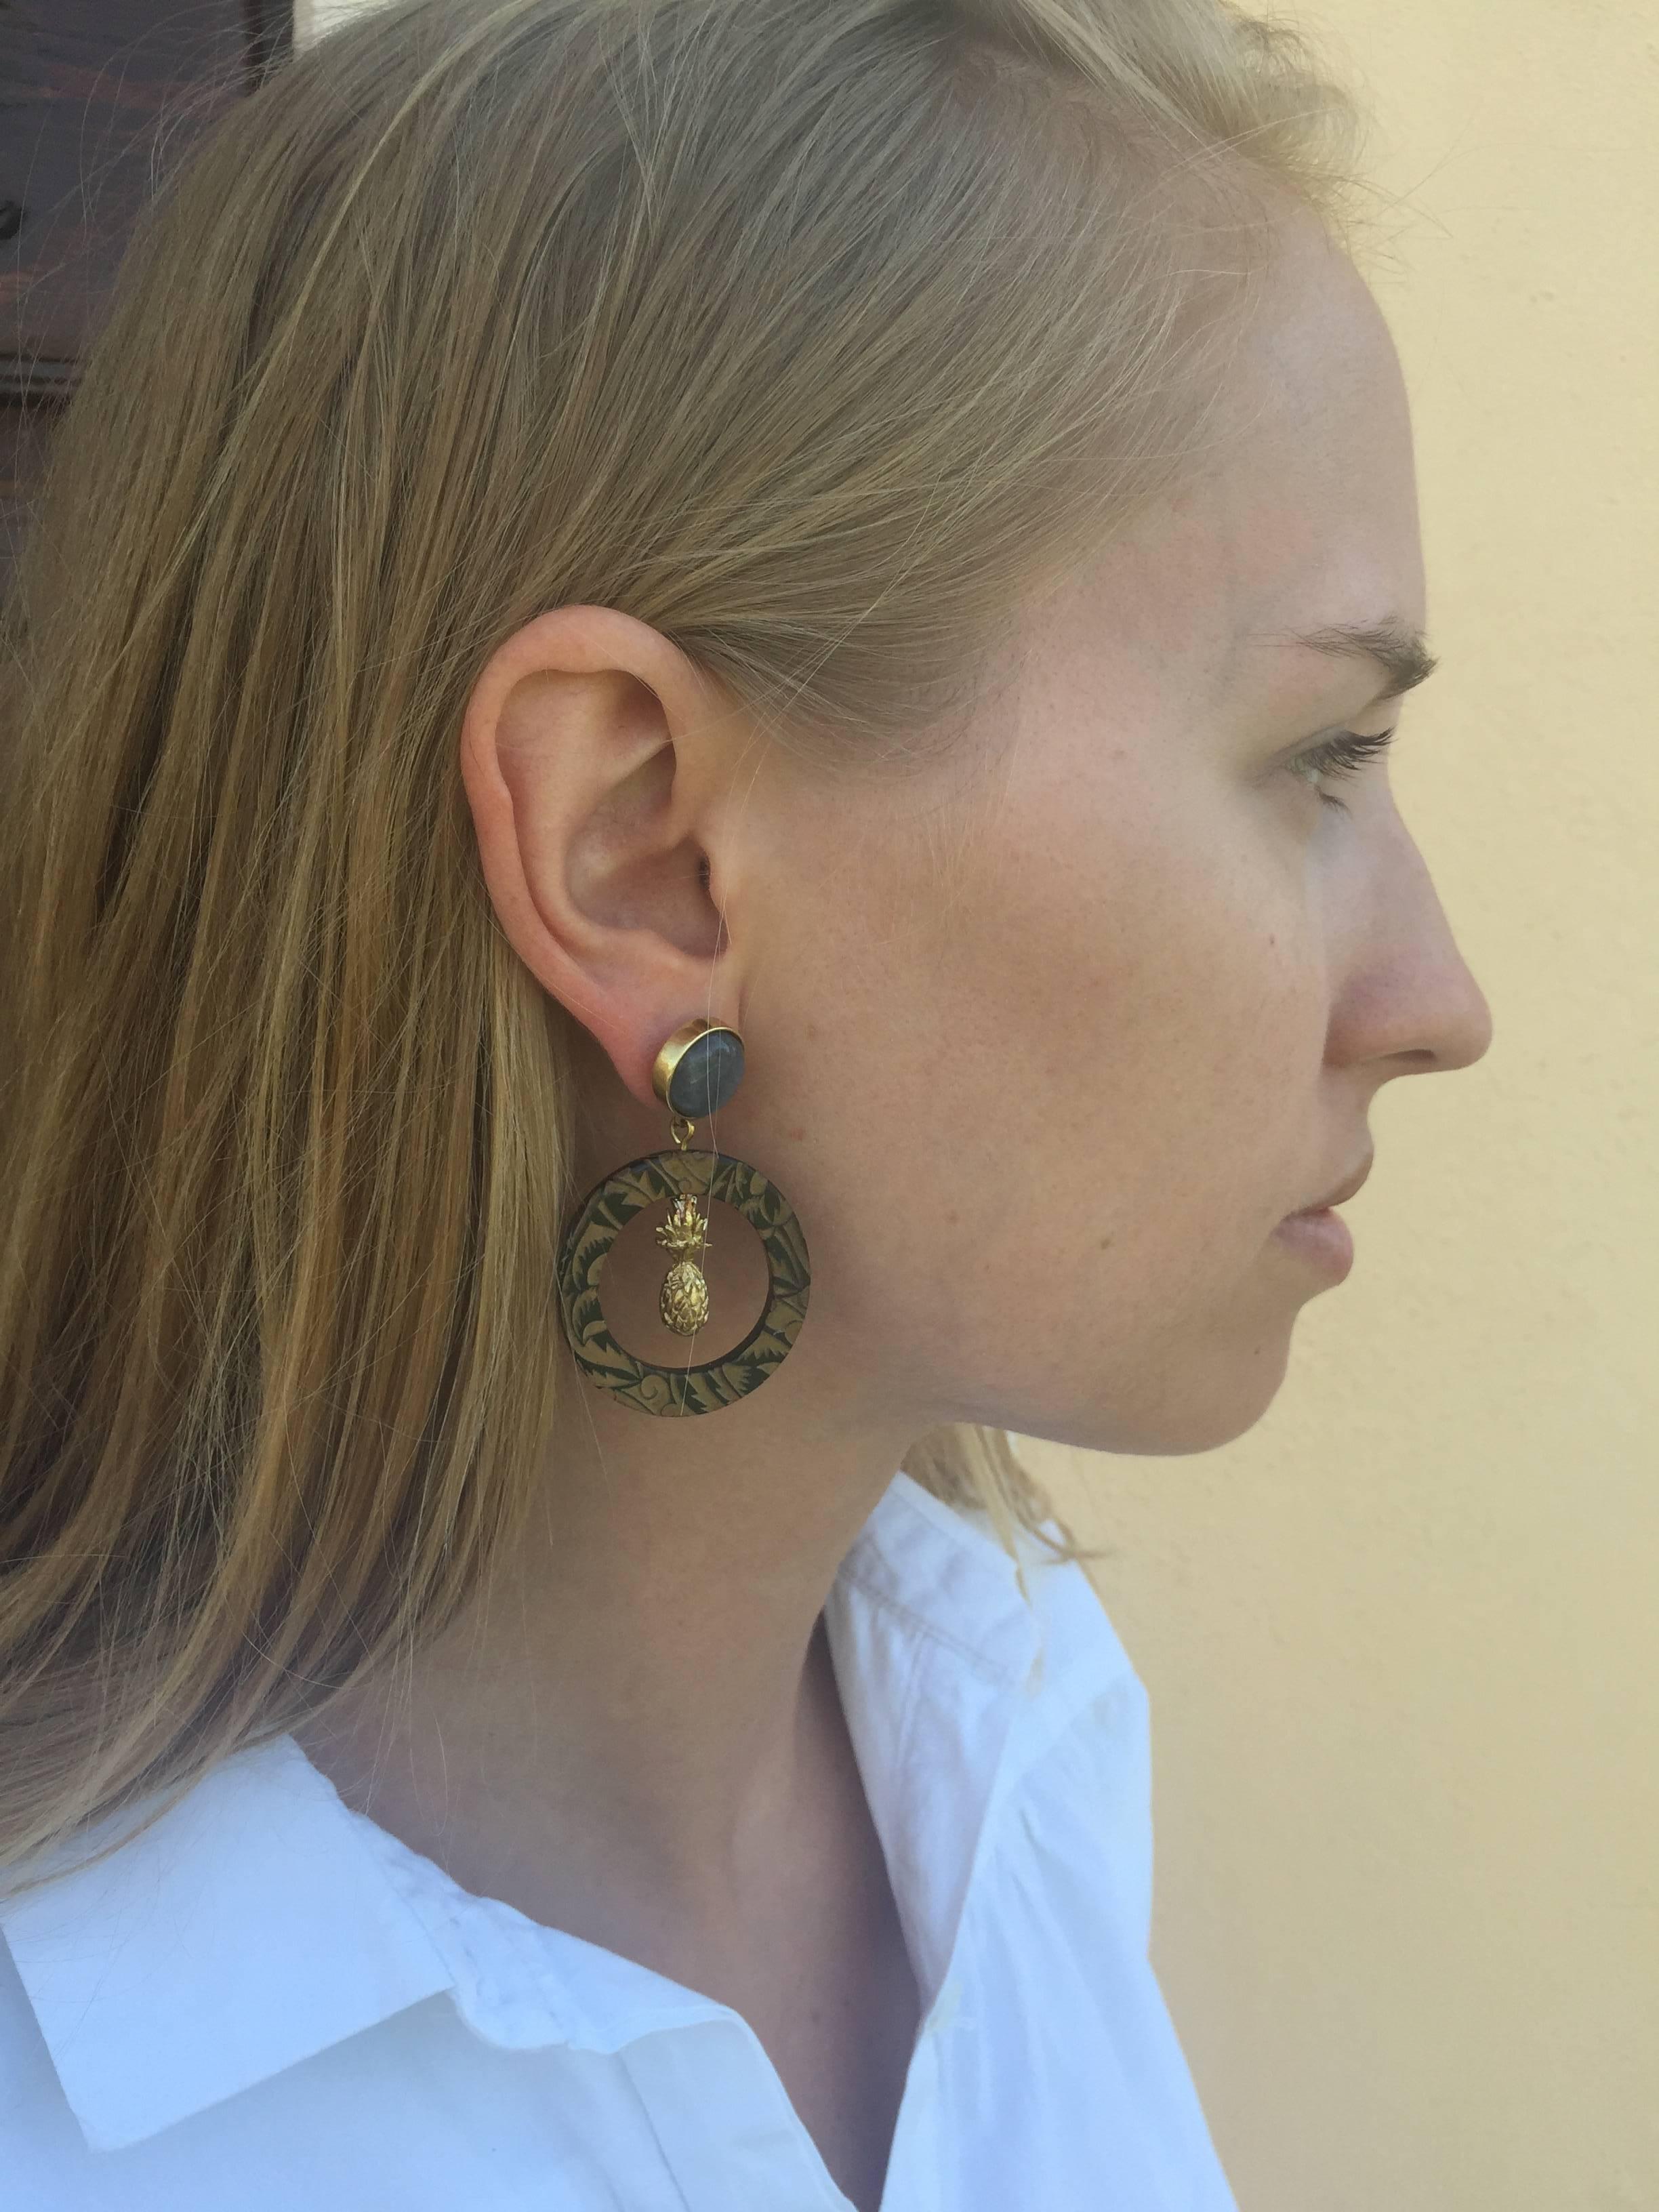 Earrings made of African cow horn engraved with art deco design; set with labradorite gemstone in blue gold color sourced from ethical mines in Madagascar, Africa. 

Earrings are hand crafted from natural materials so horn graining and slight